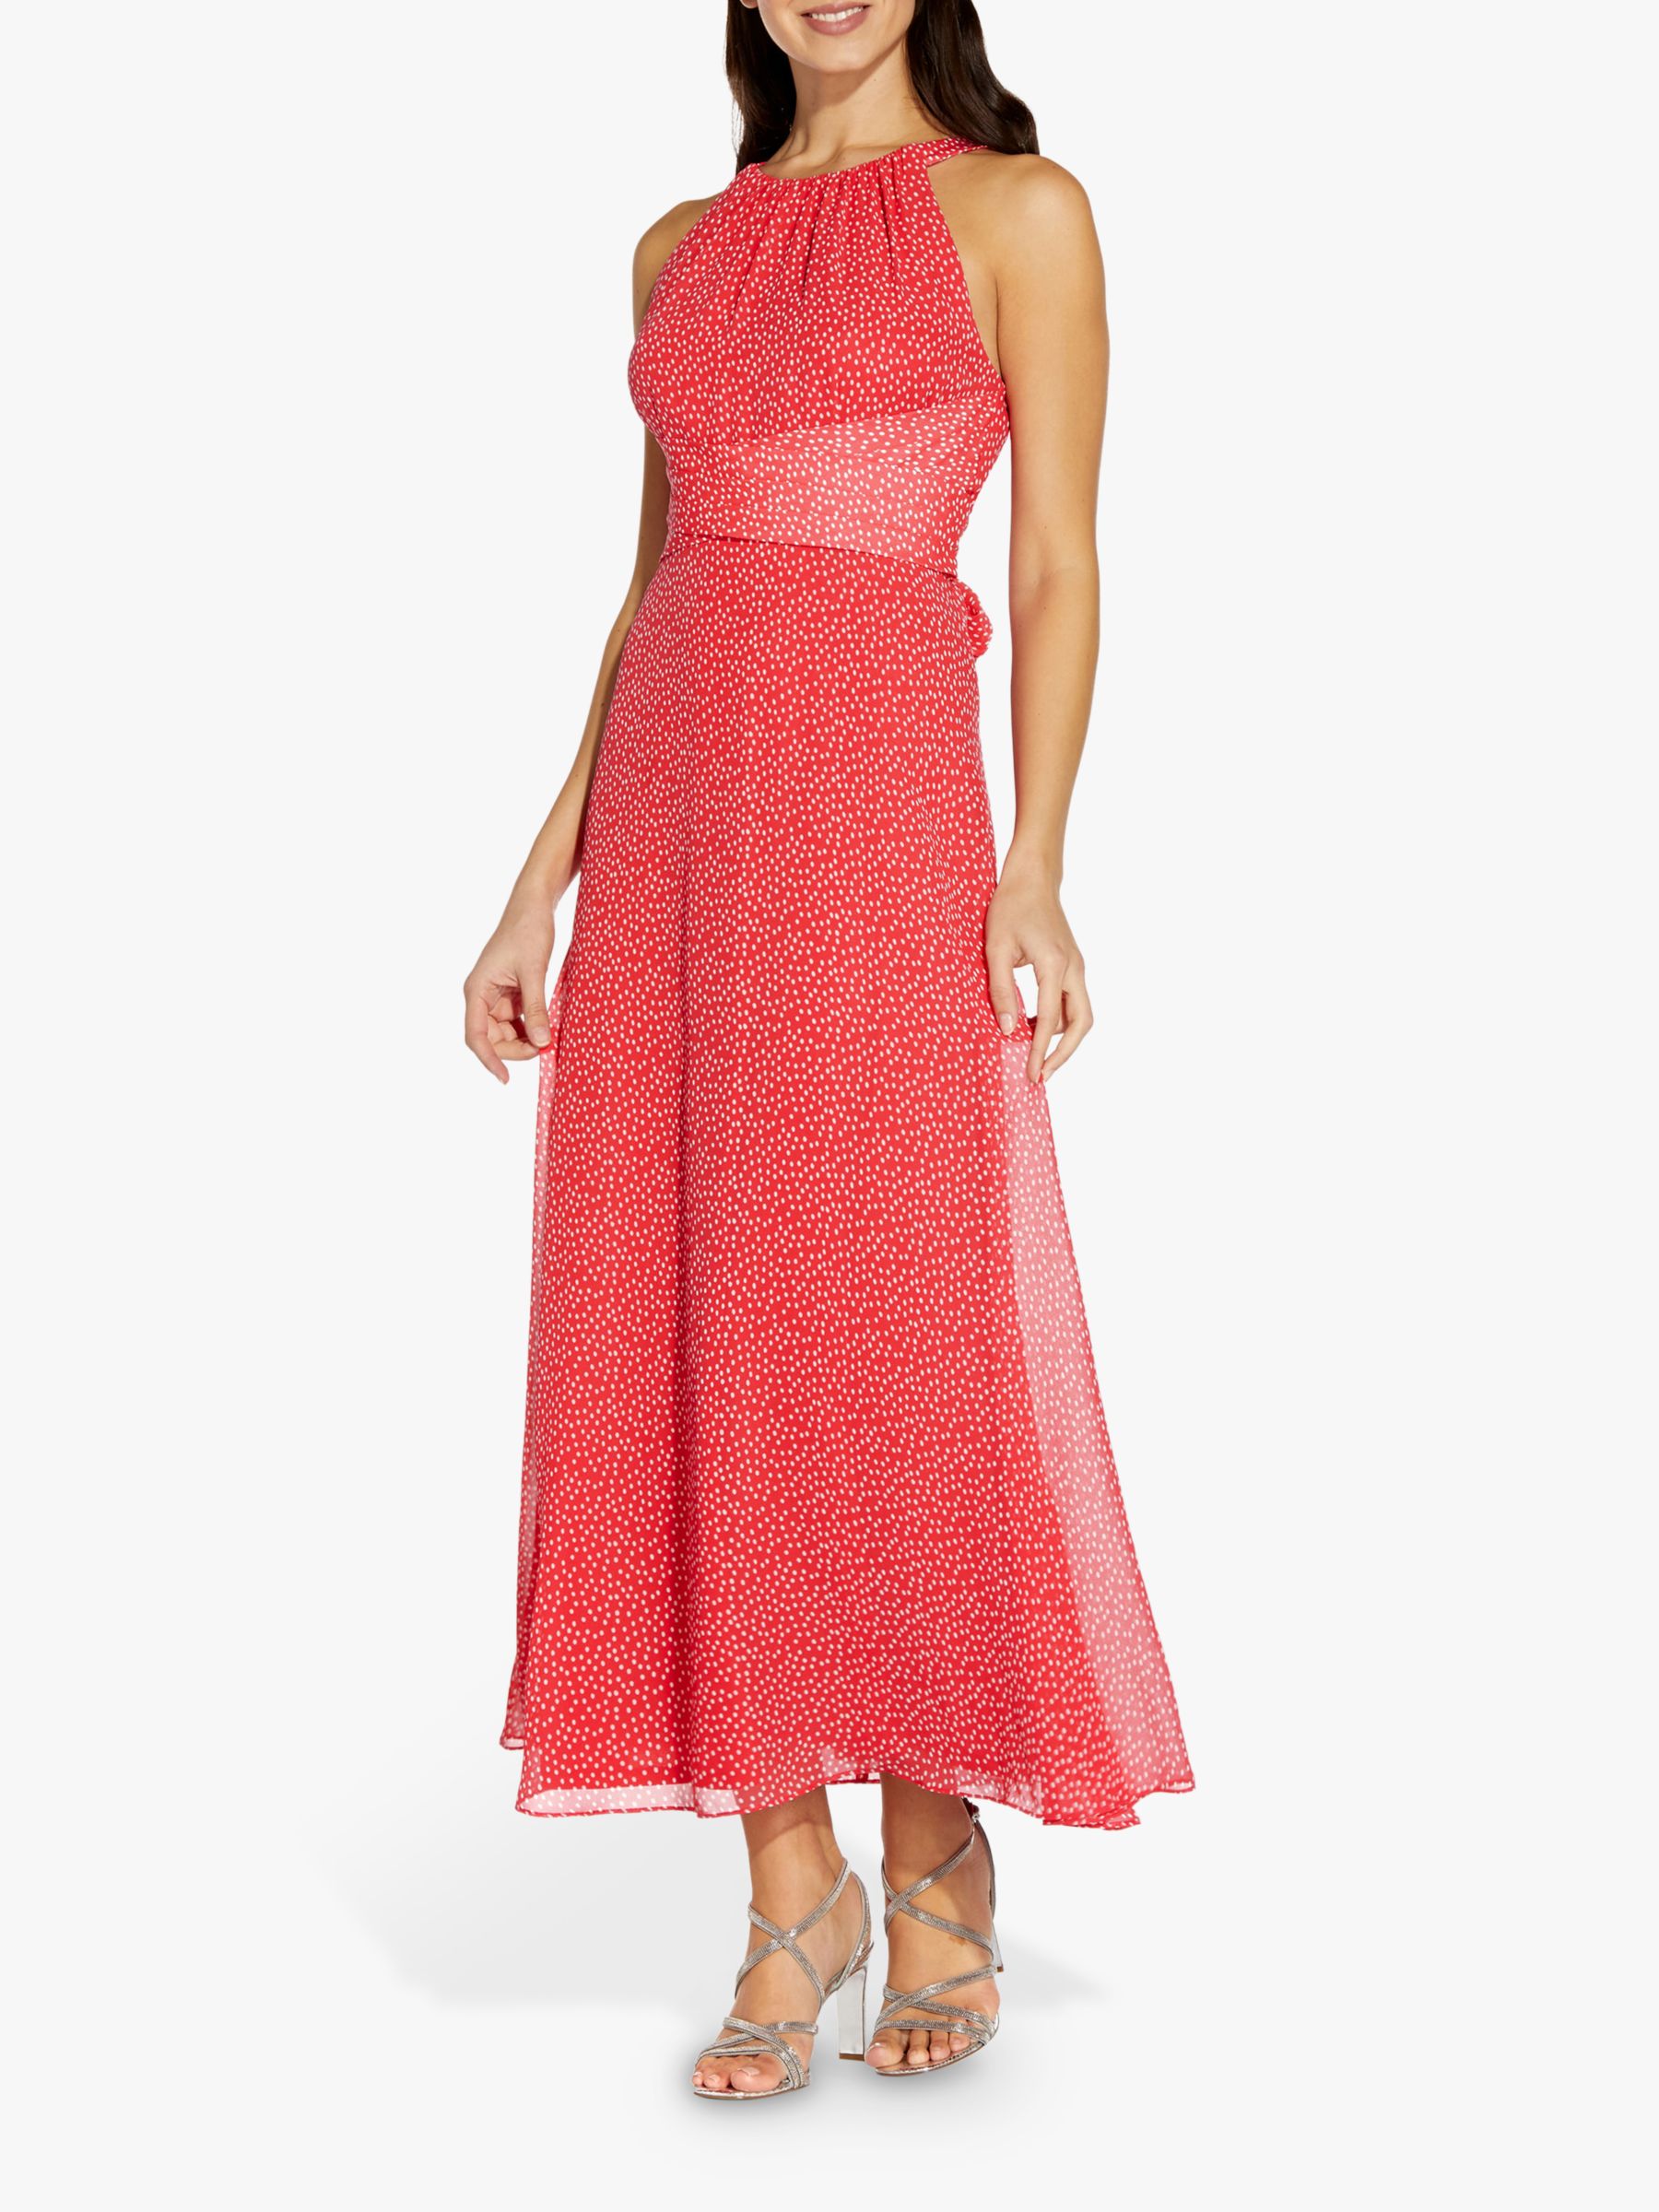 Adrianna Papell Darling Midi Dress, Coral/Ivory